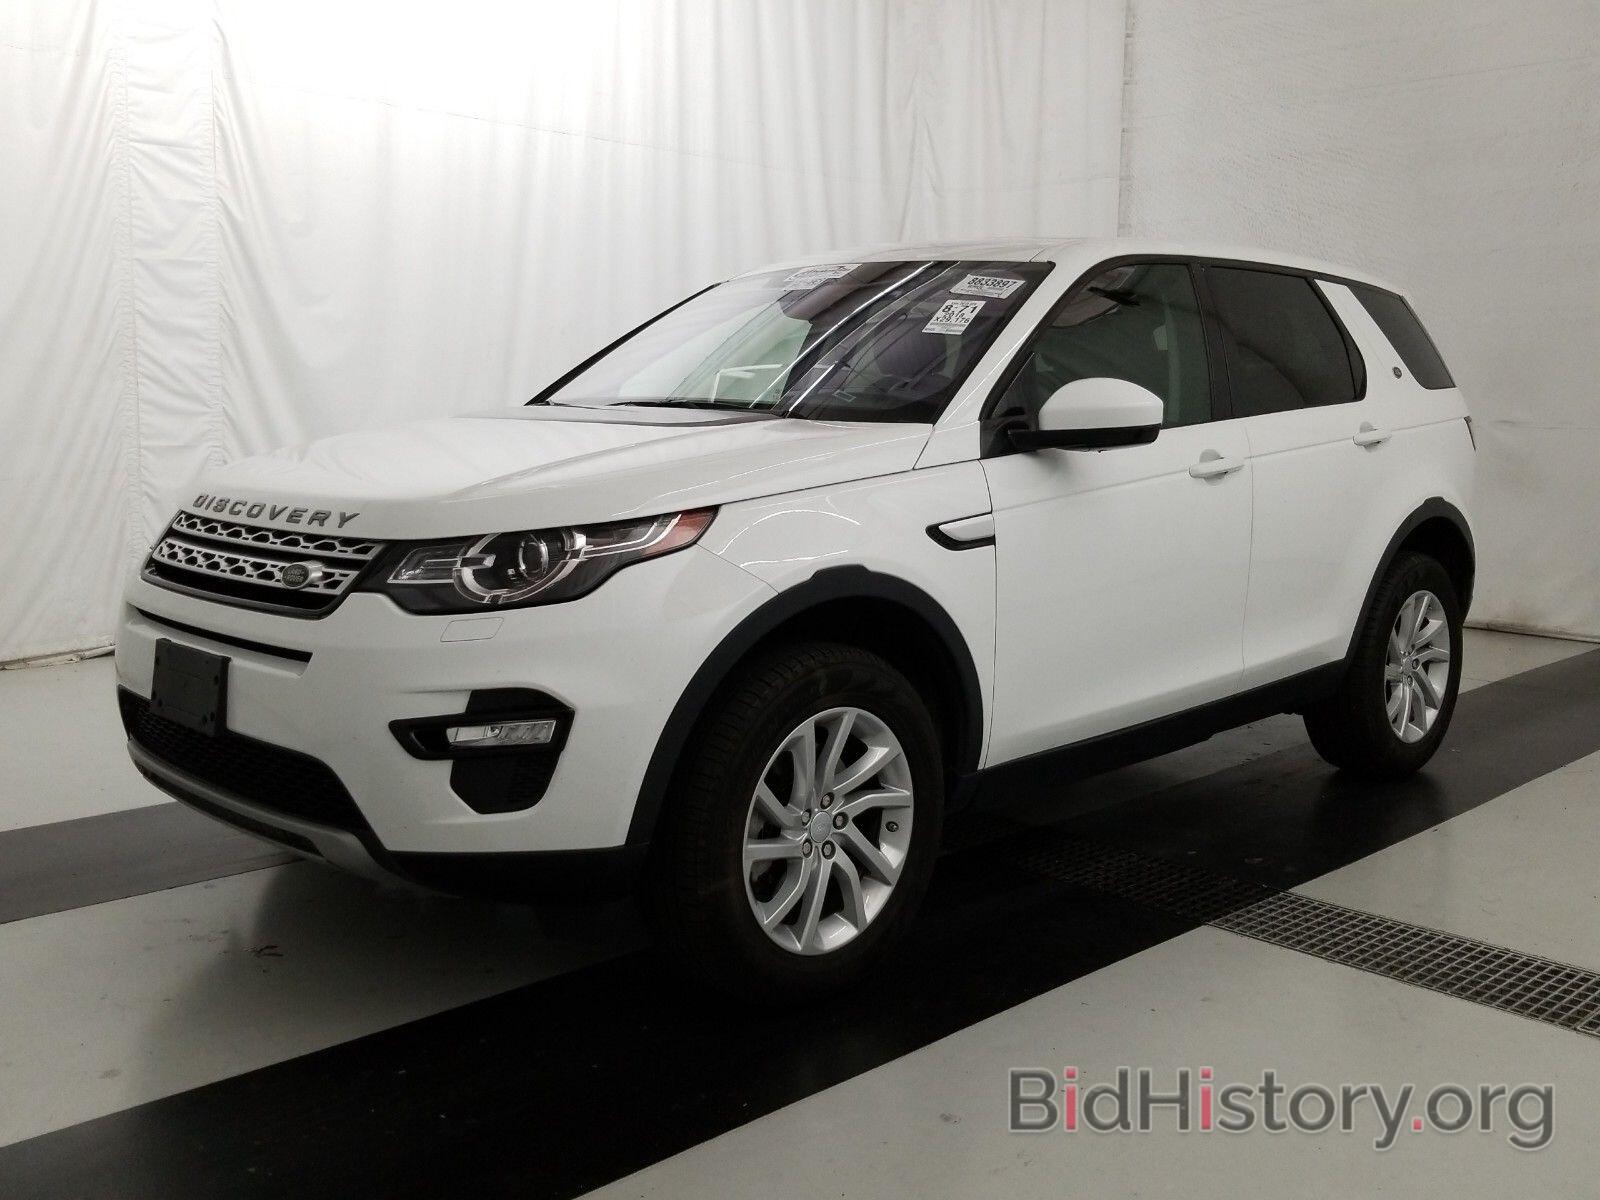 Photo SALCR2RX5JH743201 - Land Rover Discovery Sport 2018